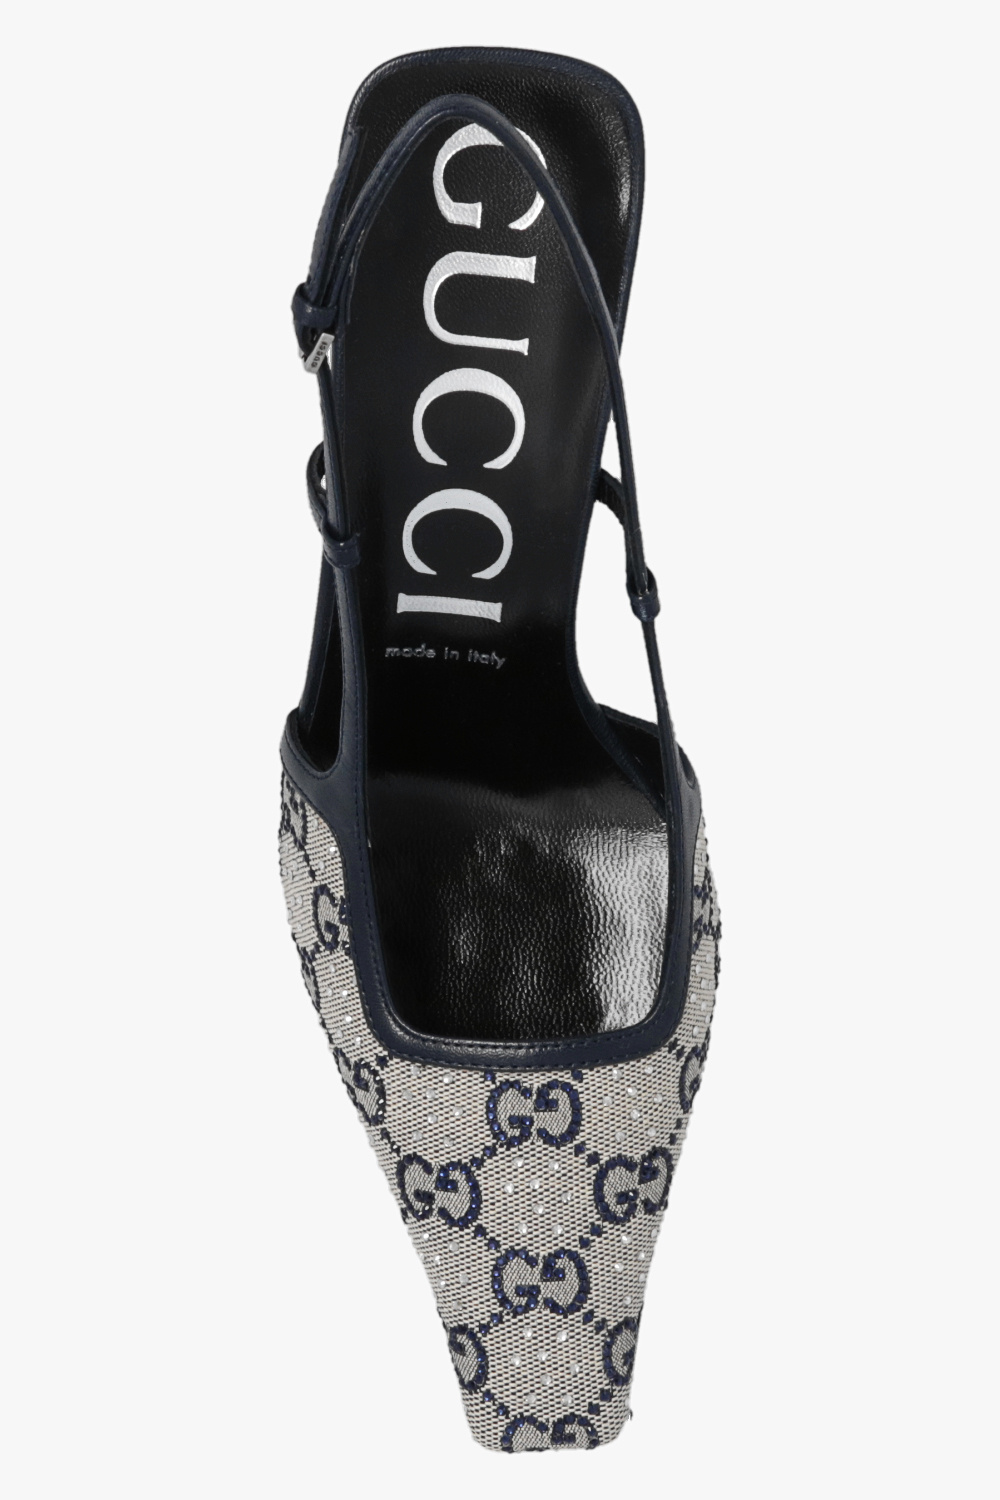 Gucci Pumps with crystals